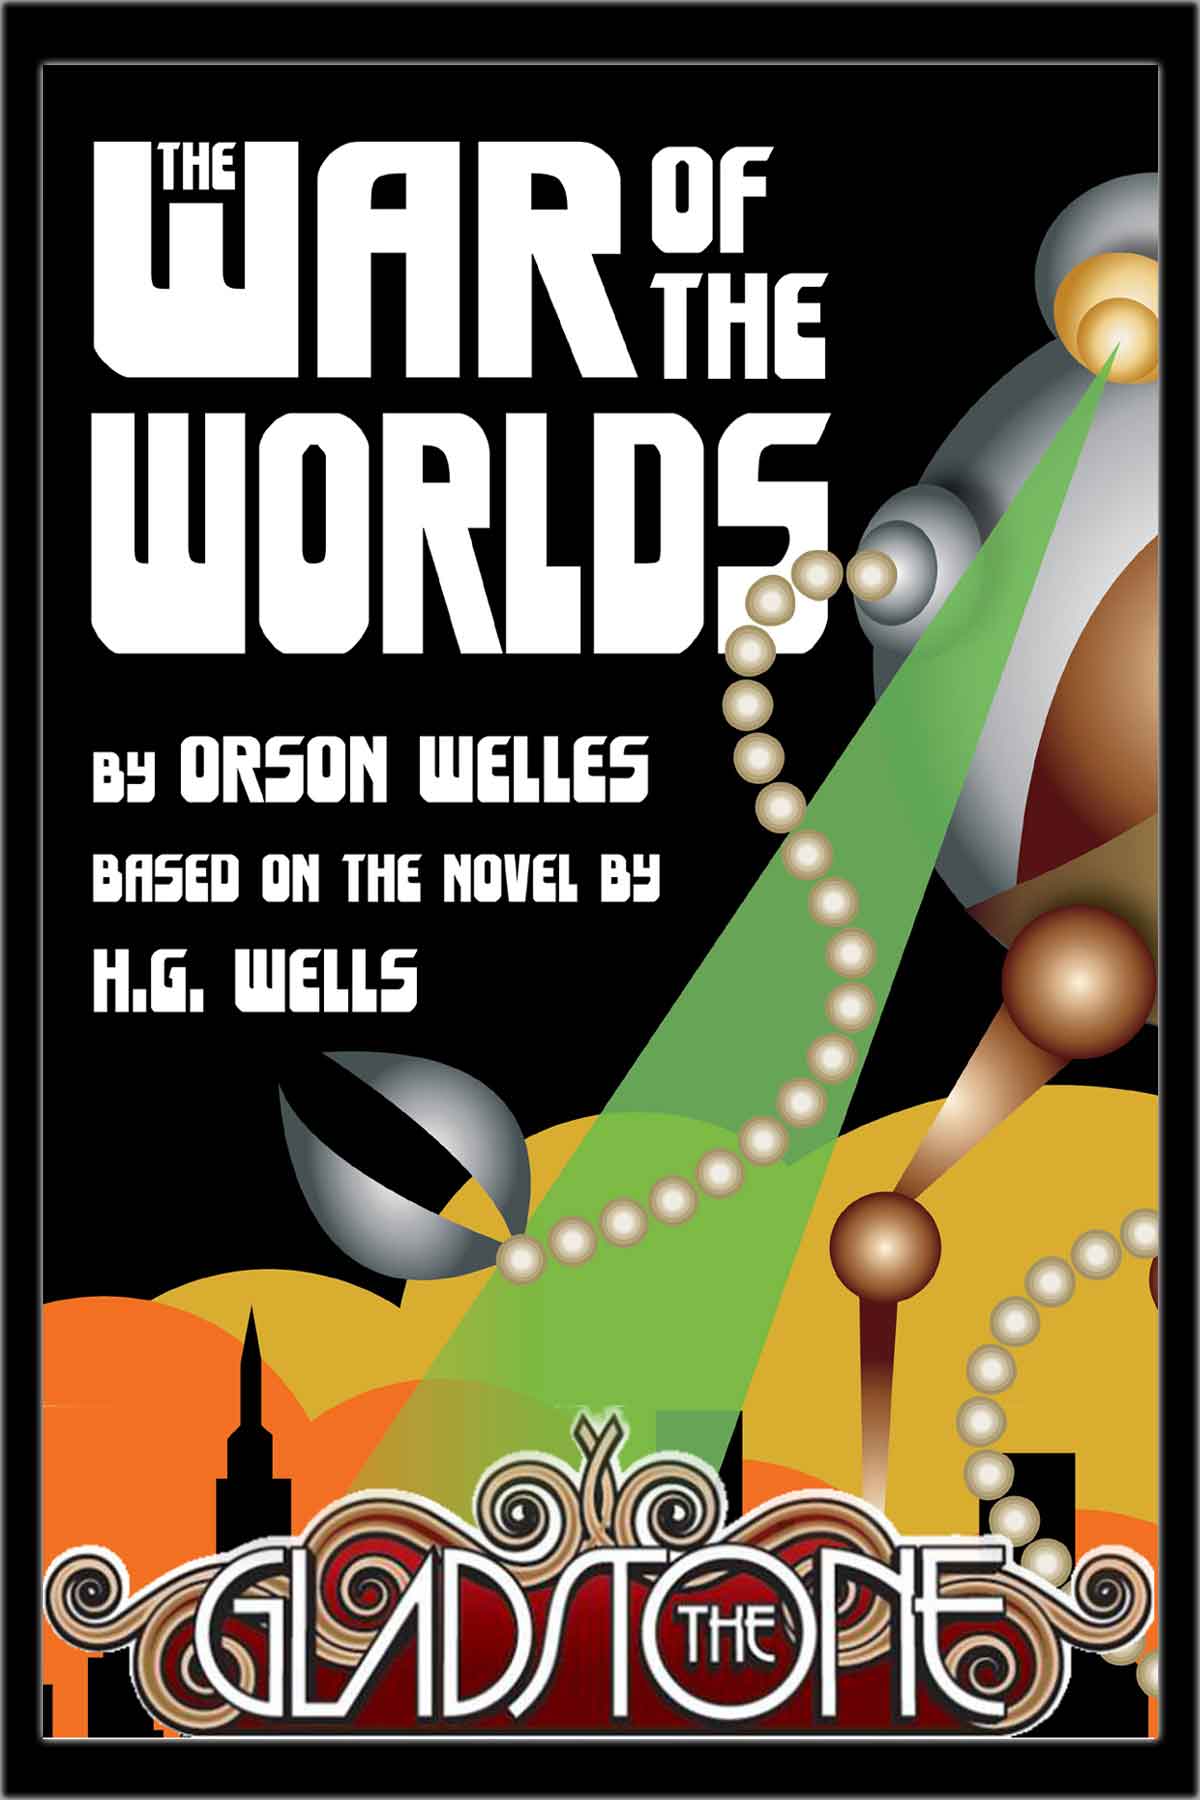 War-of-the-Worlds